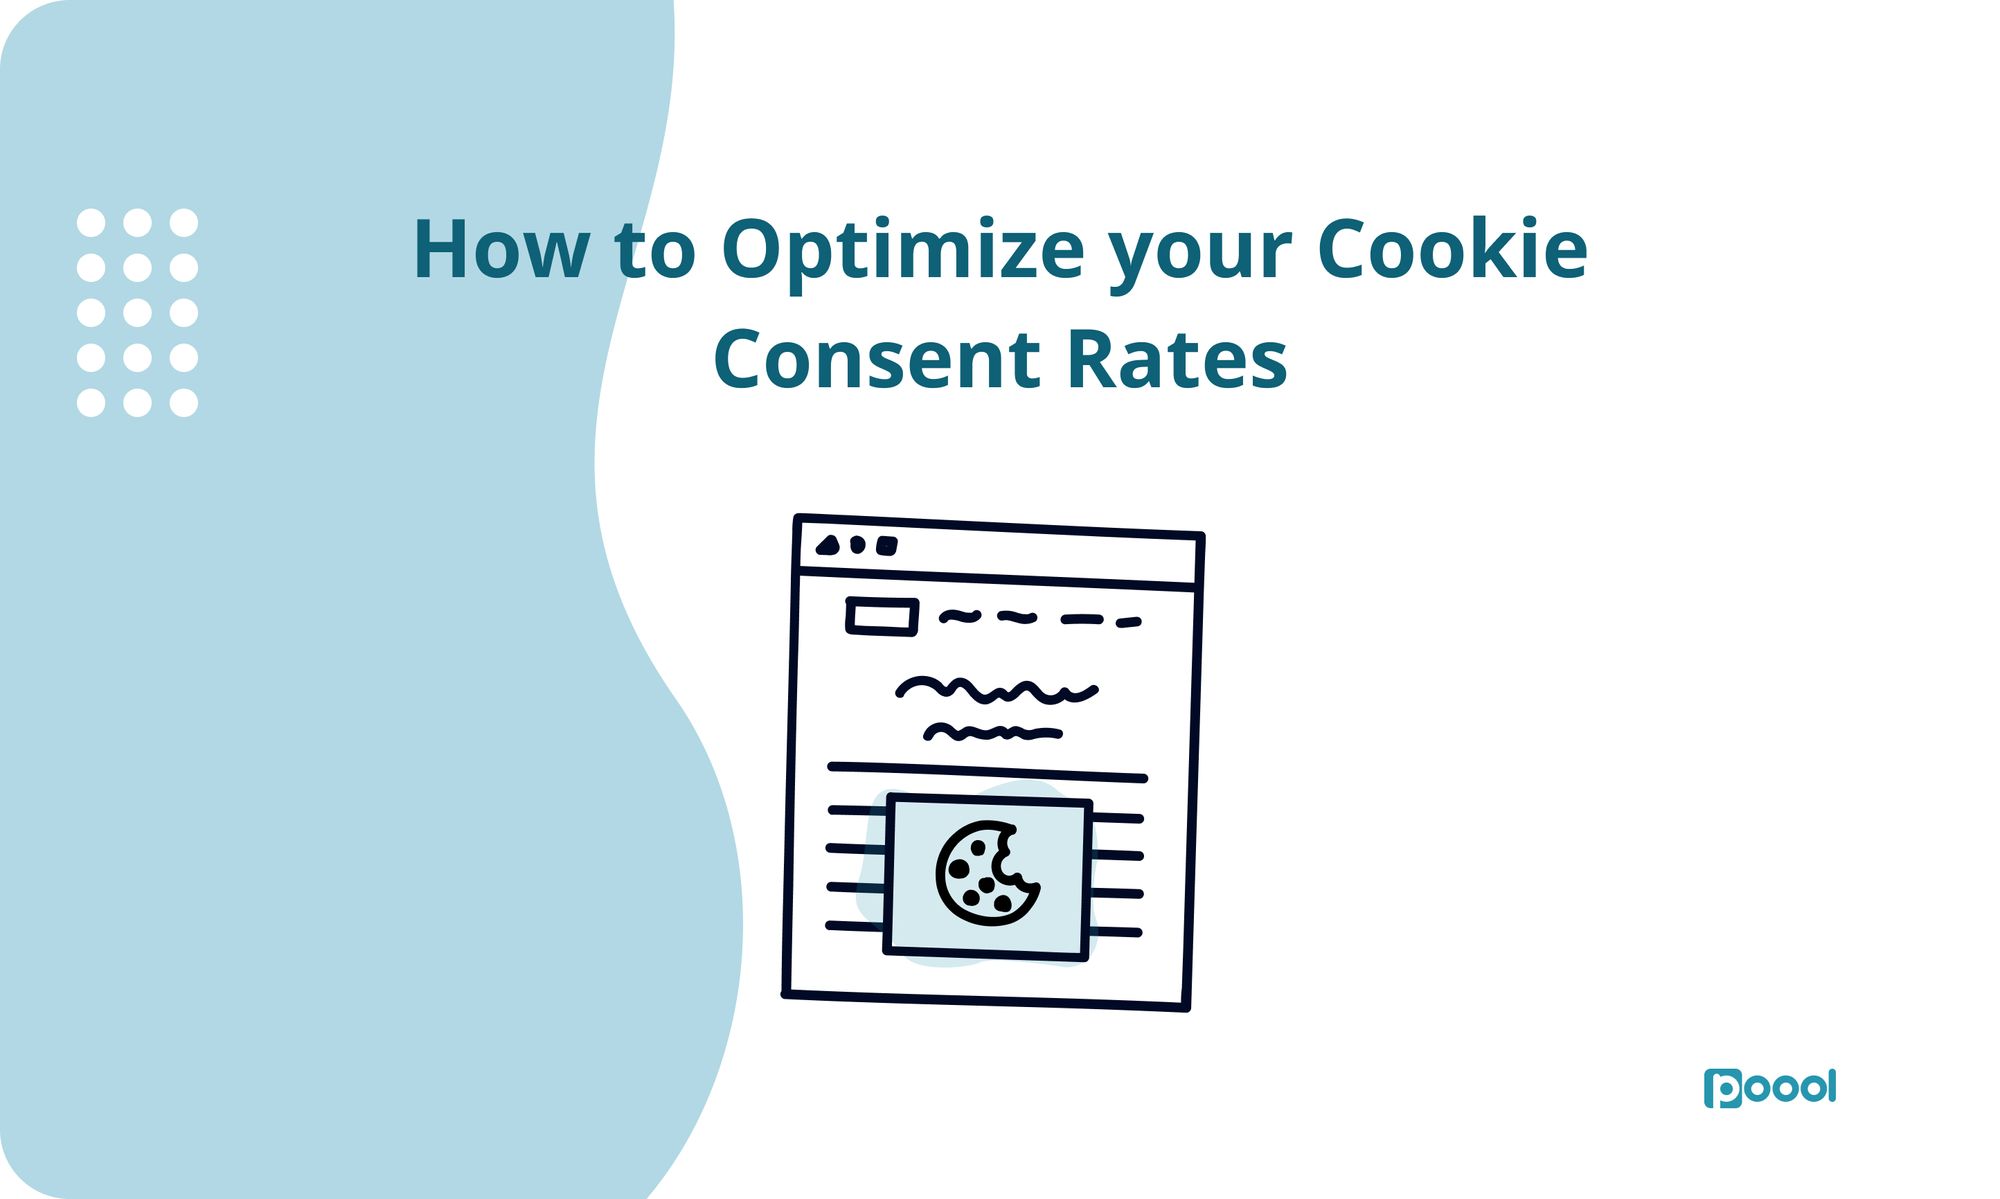 How to Optimize your Cookie Consent Rates.